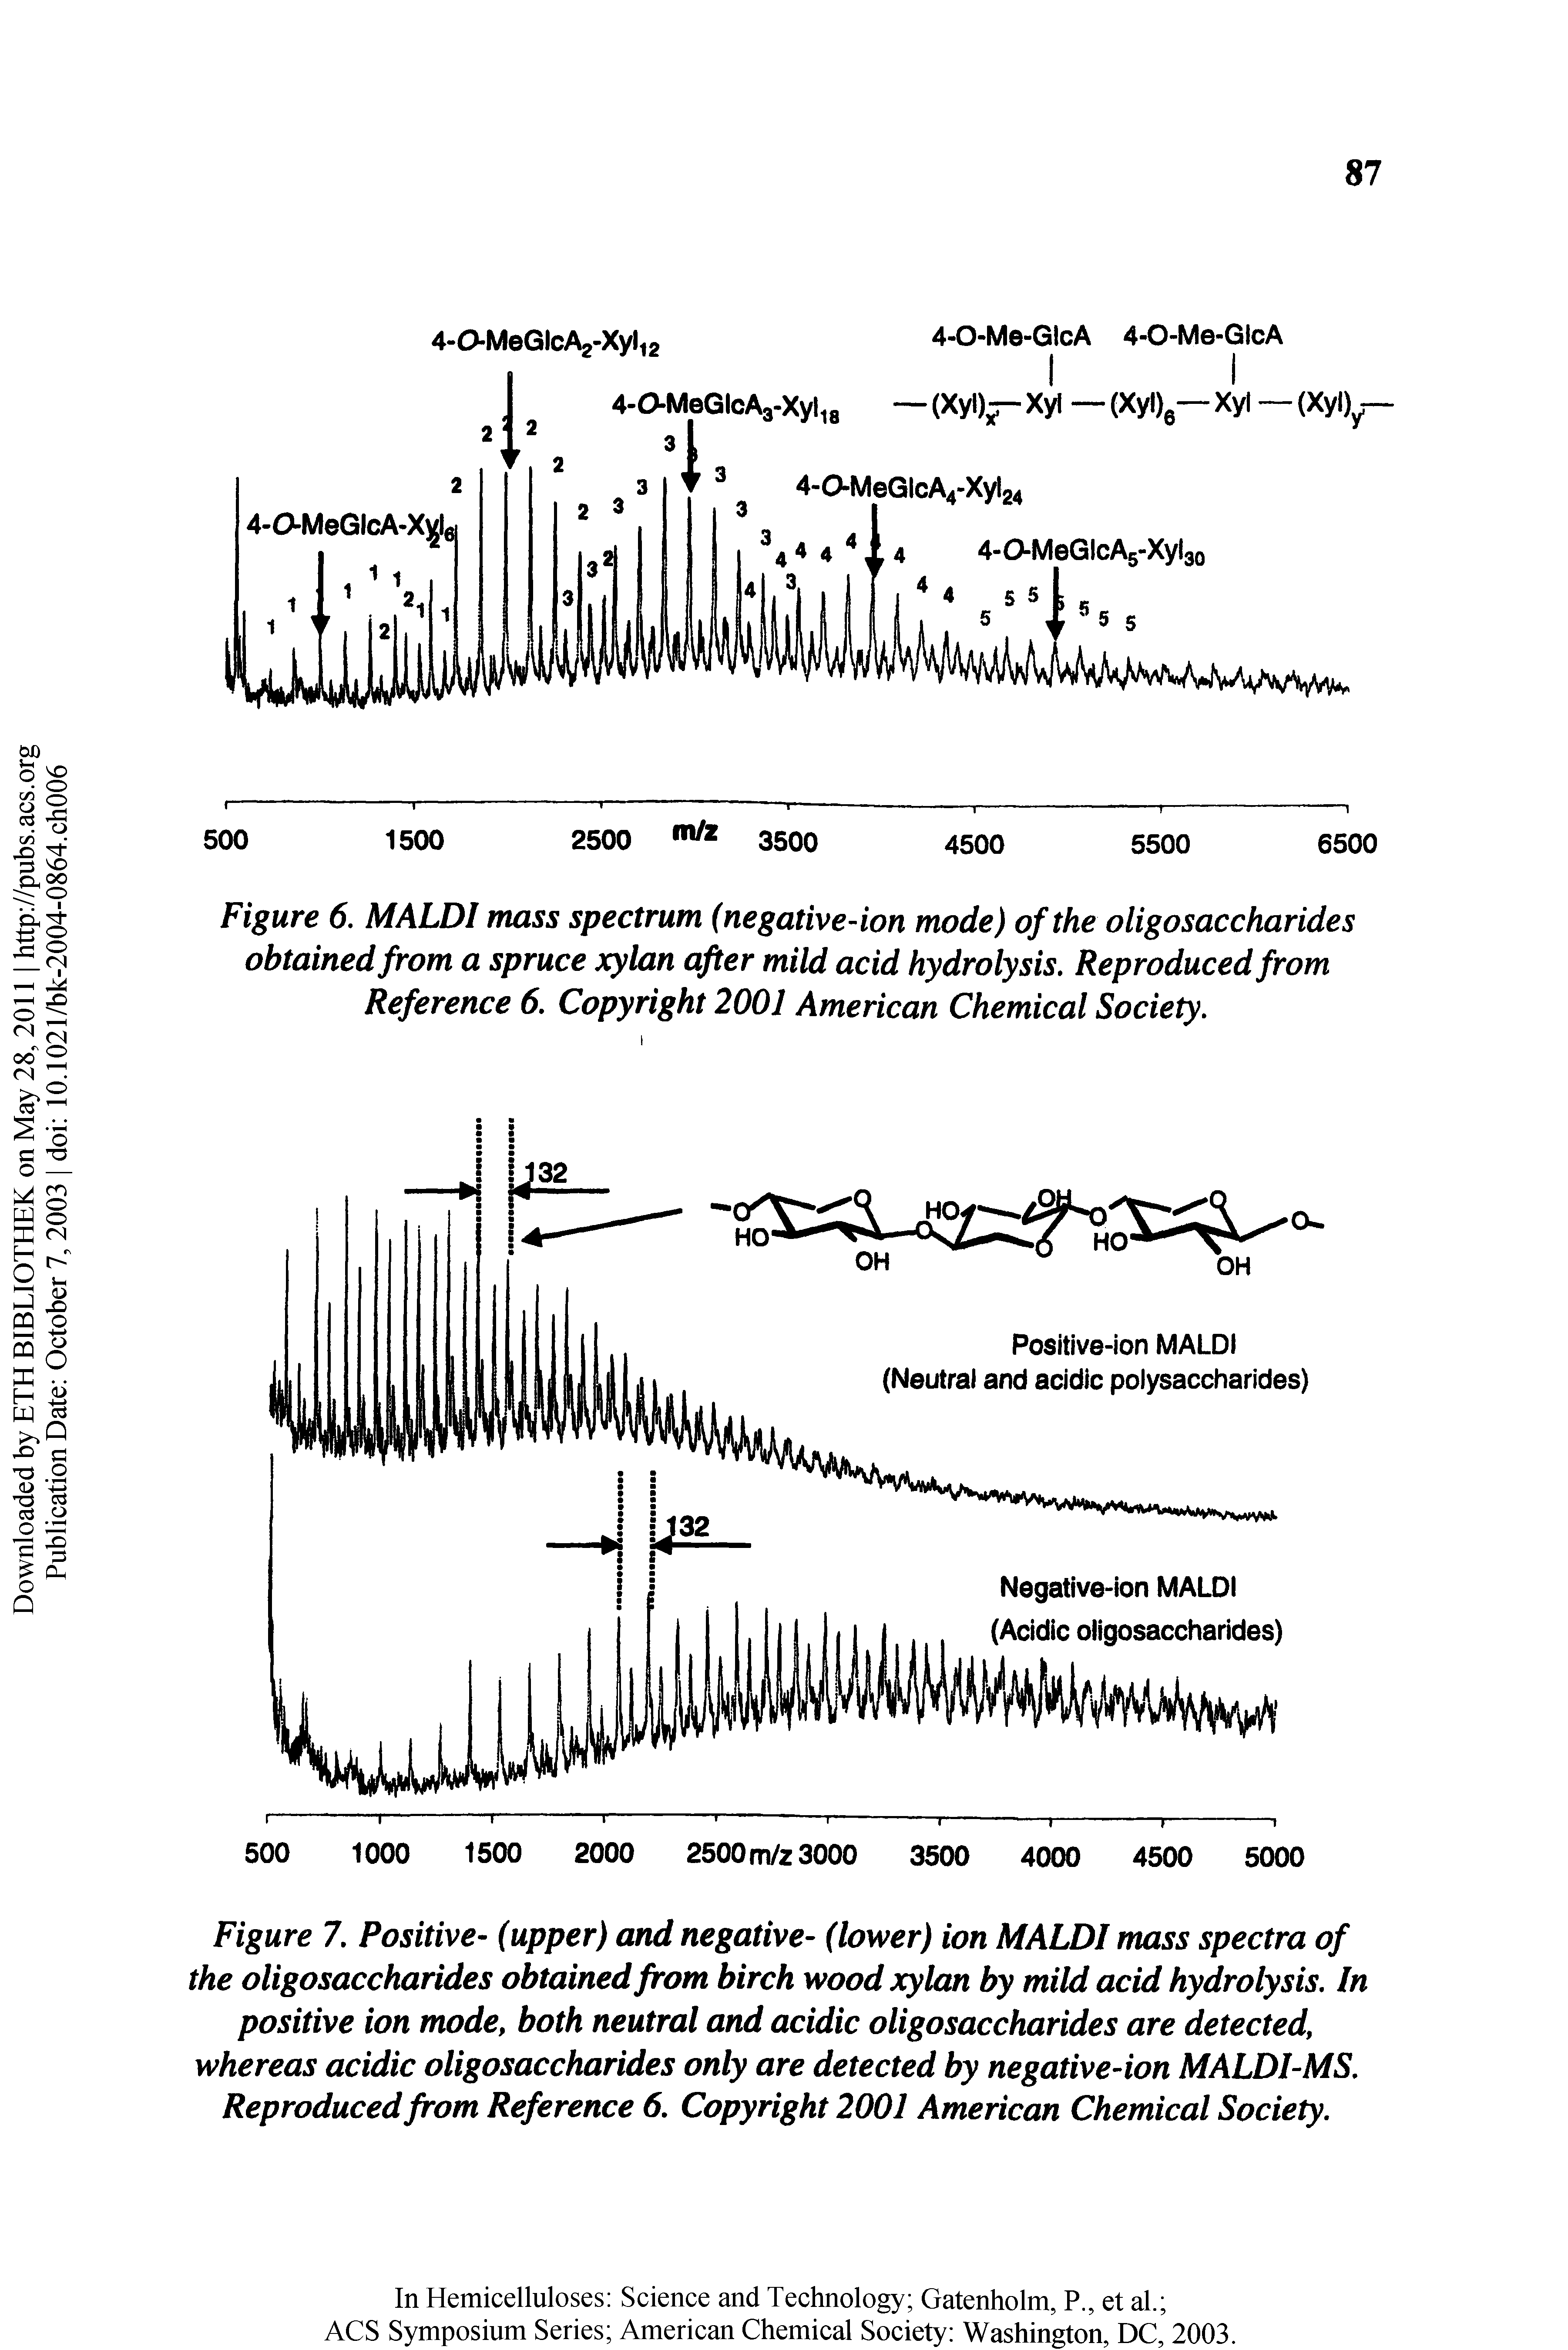 Figure 7. Positive- (upper) and negative- (lower) ion MALDI mass spectra of the oligosaccharides obtained from birch wood xylan by mild acid hydrolysis. In positive ion mode, both neutral and acidic oligosaccharides are detected, whereas acidic oligosaccharides only are detected by negative-ion MALDI-MS. Reproduced from Reference 6. Copyright 2001 American Chemical Society.